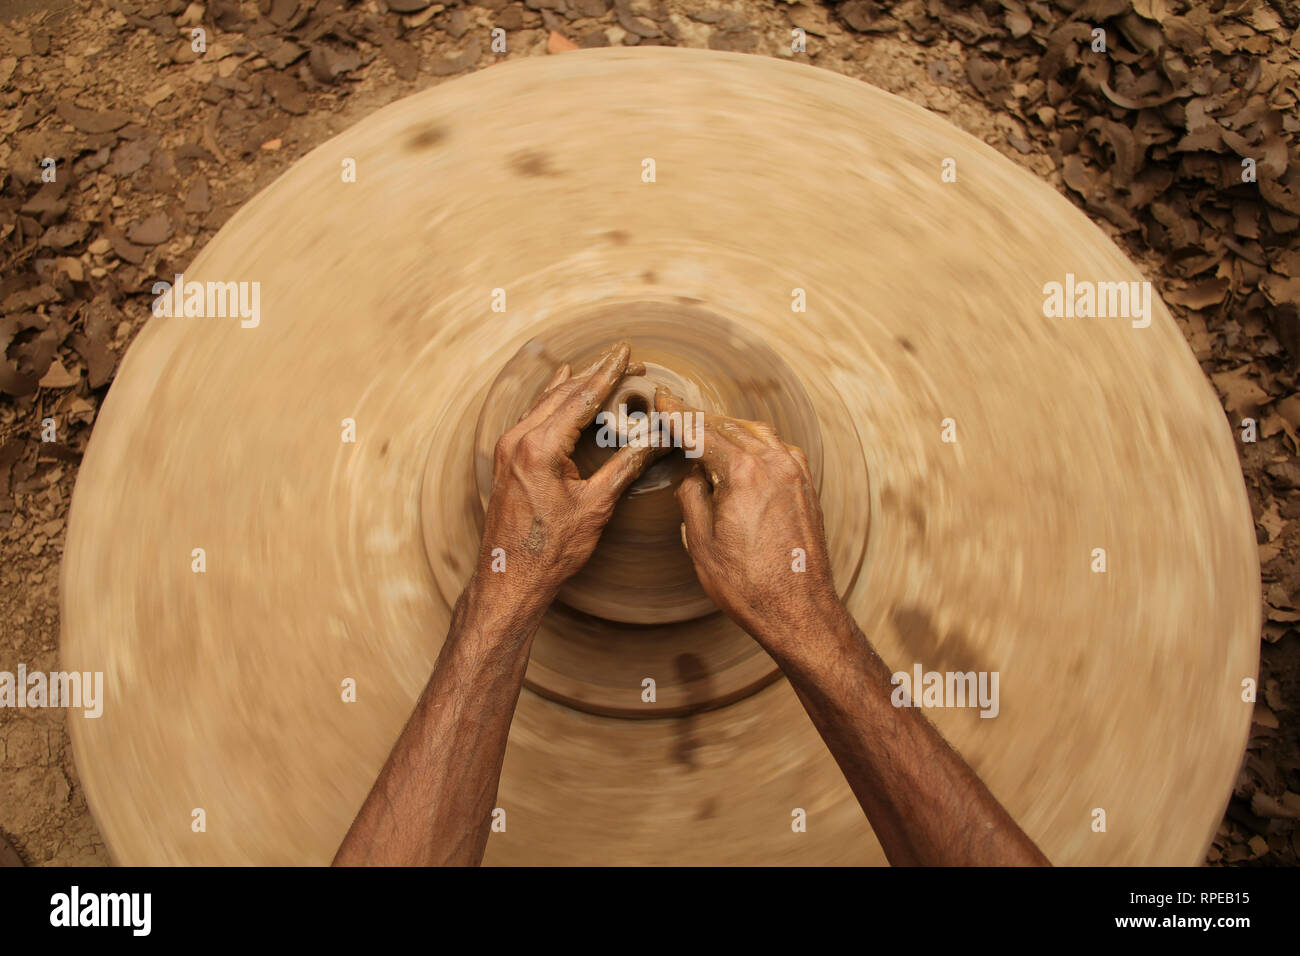 Kashmiri potter works with mud to make an earthen pot at a village in Budgam Kashmir Stock Photo